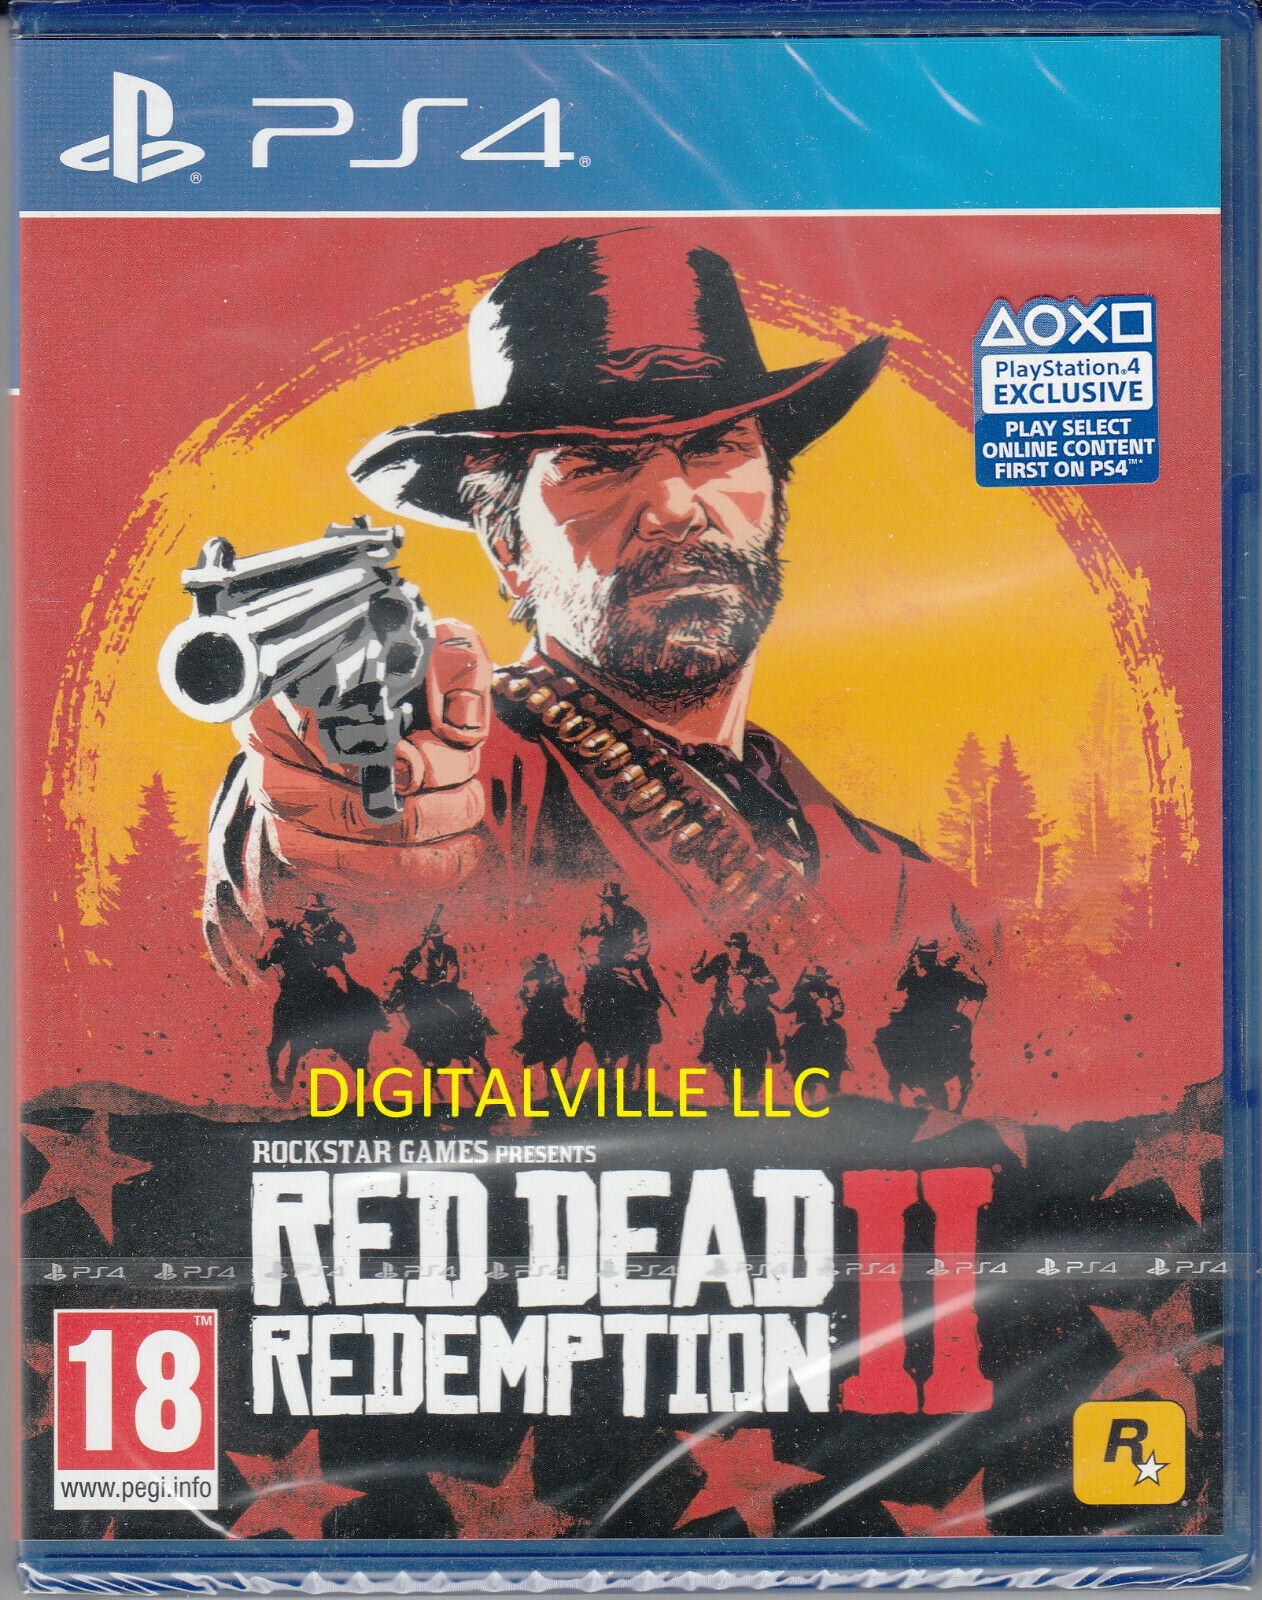  Red Dead Redemption 2 Playstation 4 : Take 2